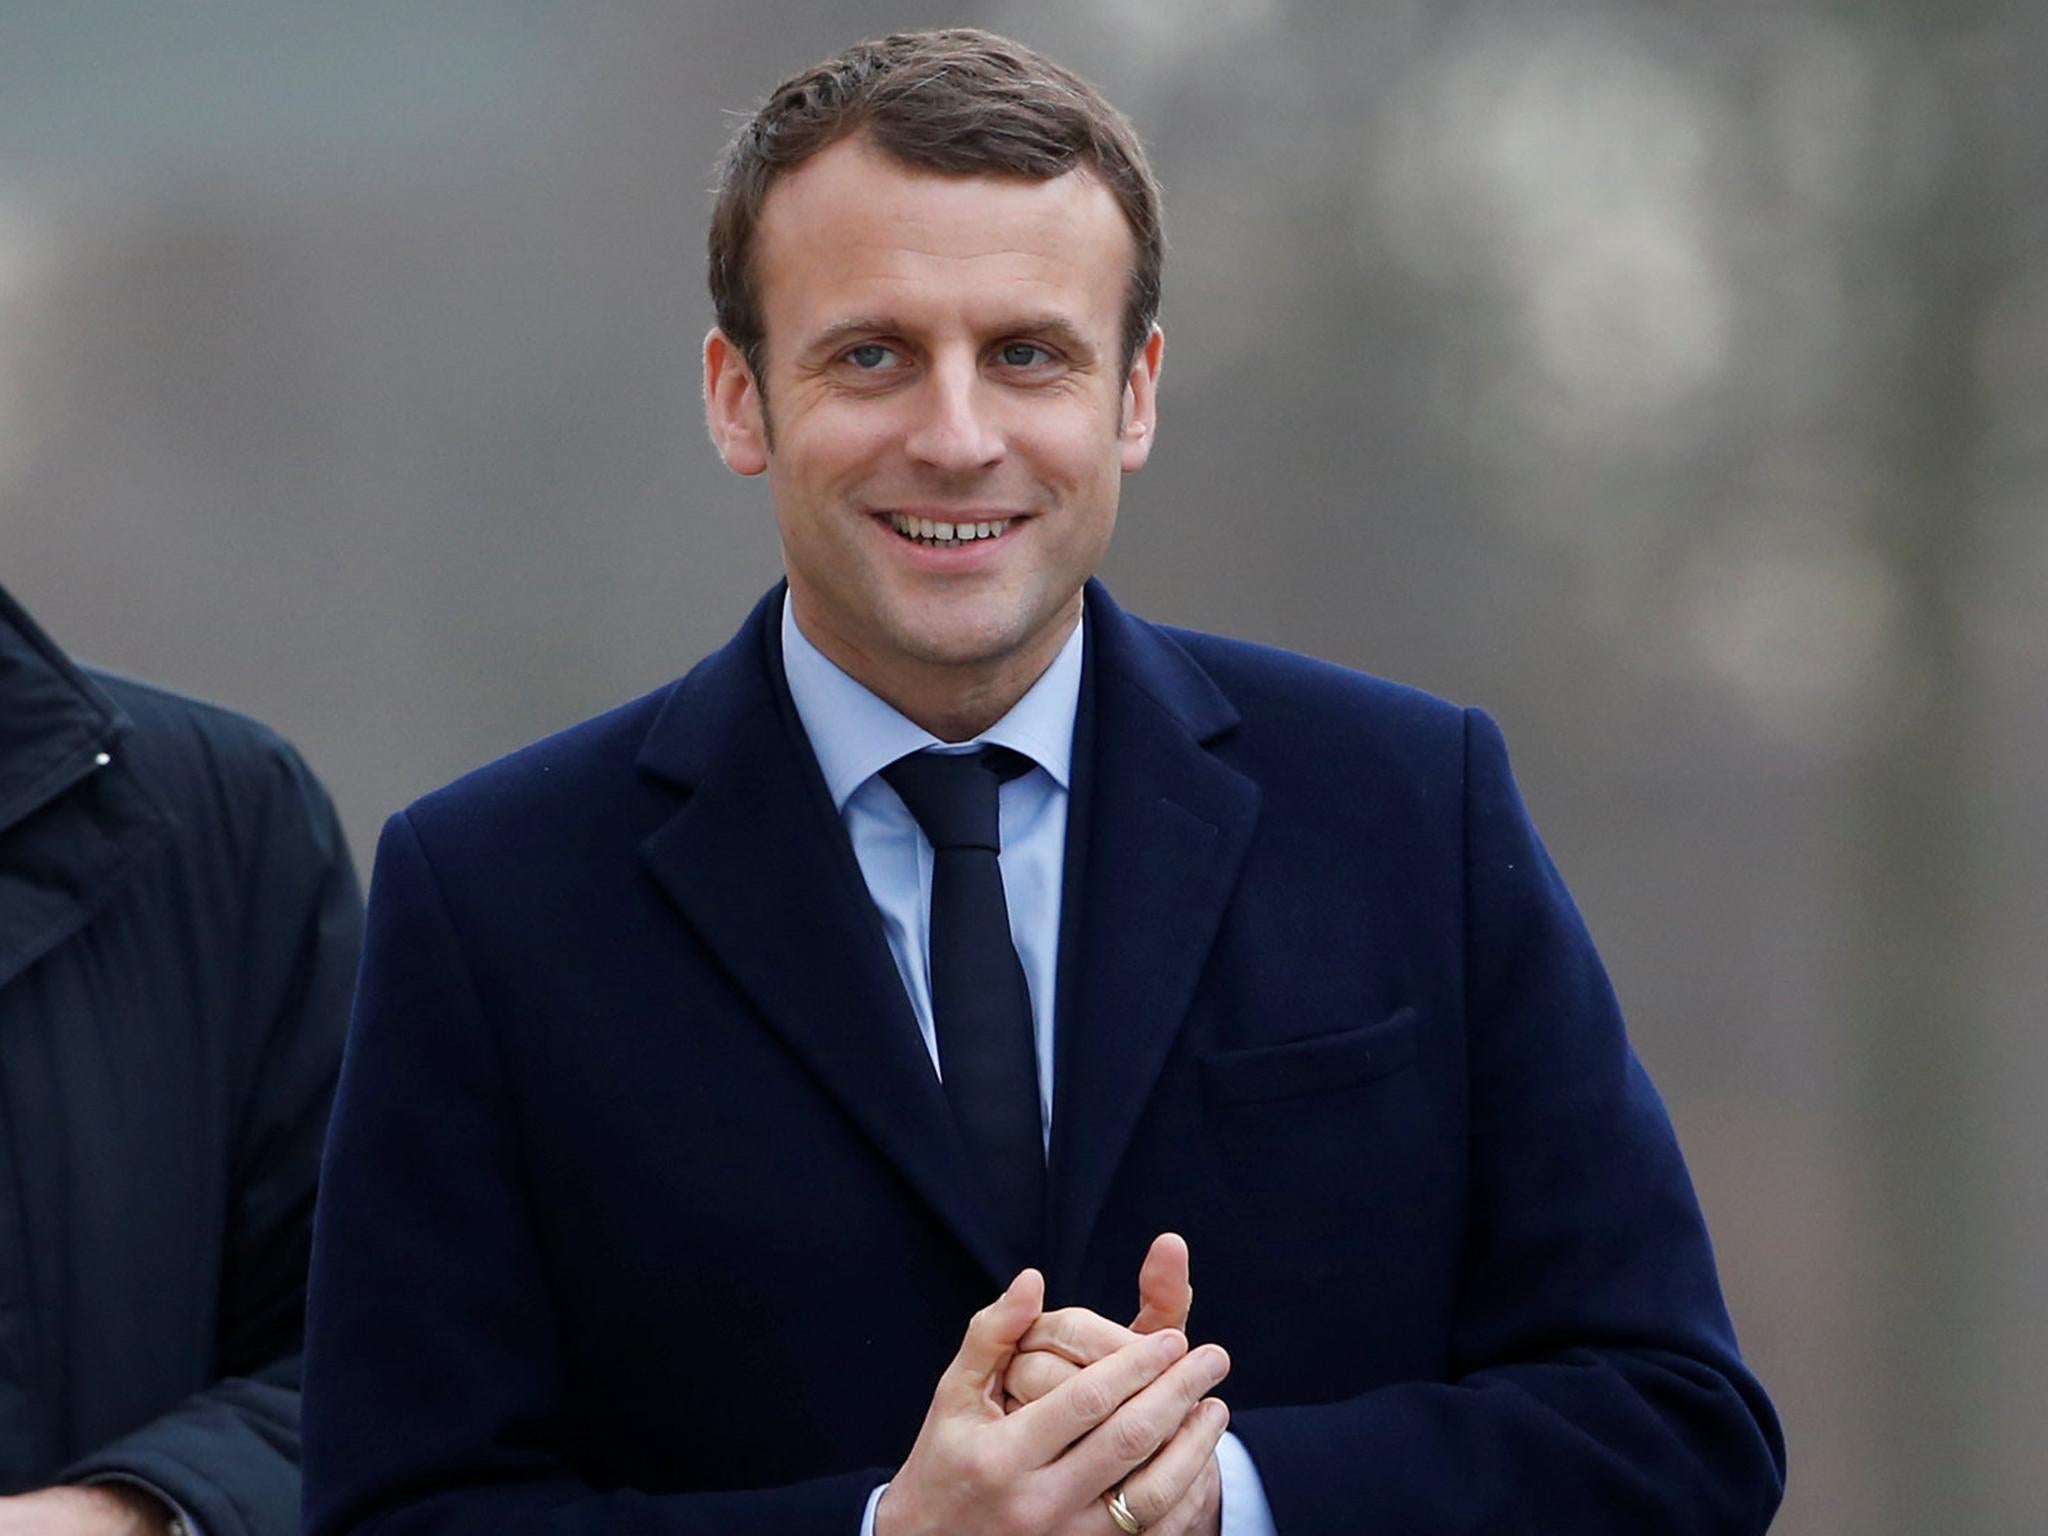 Emmanuel Macron becomes the youngest French President in the history of the republic